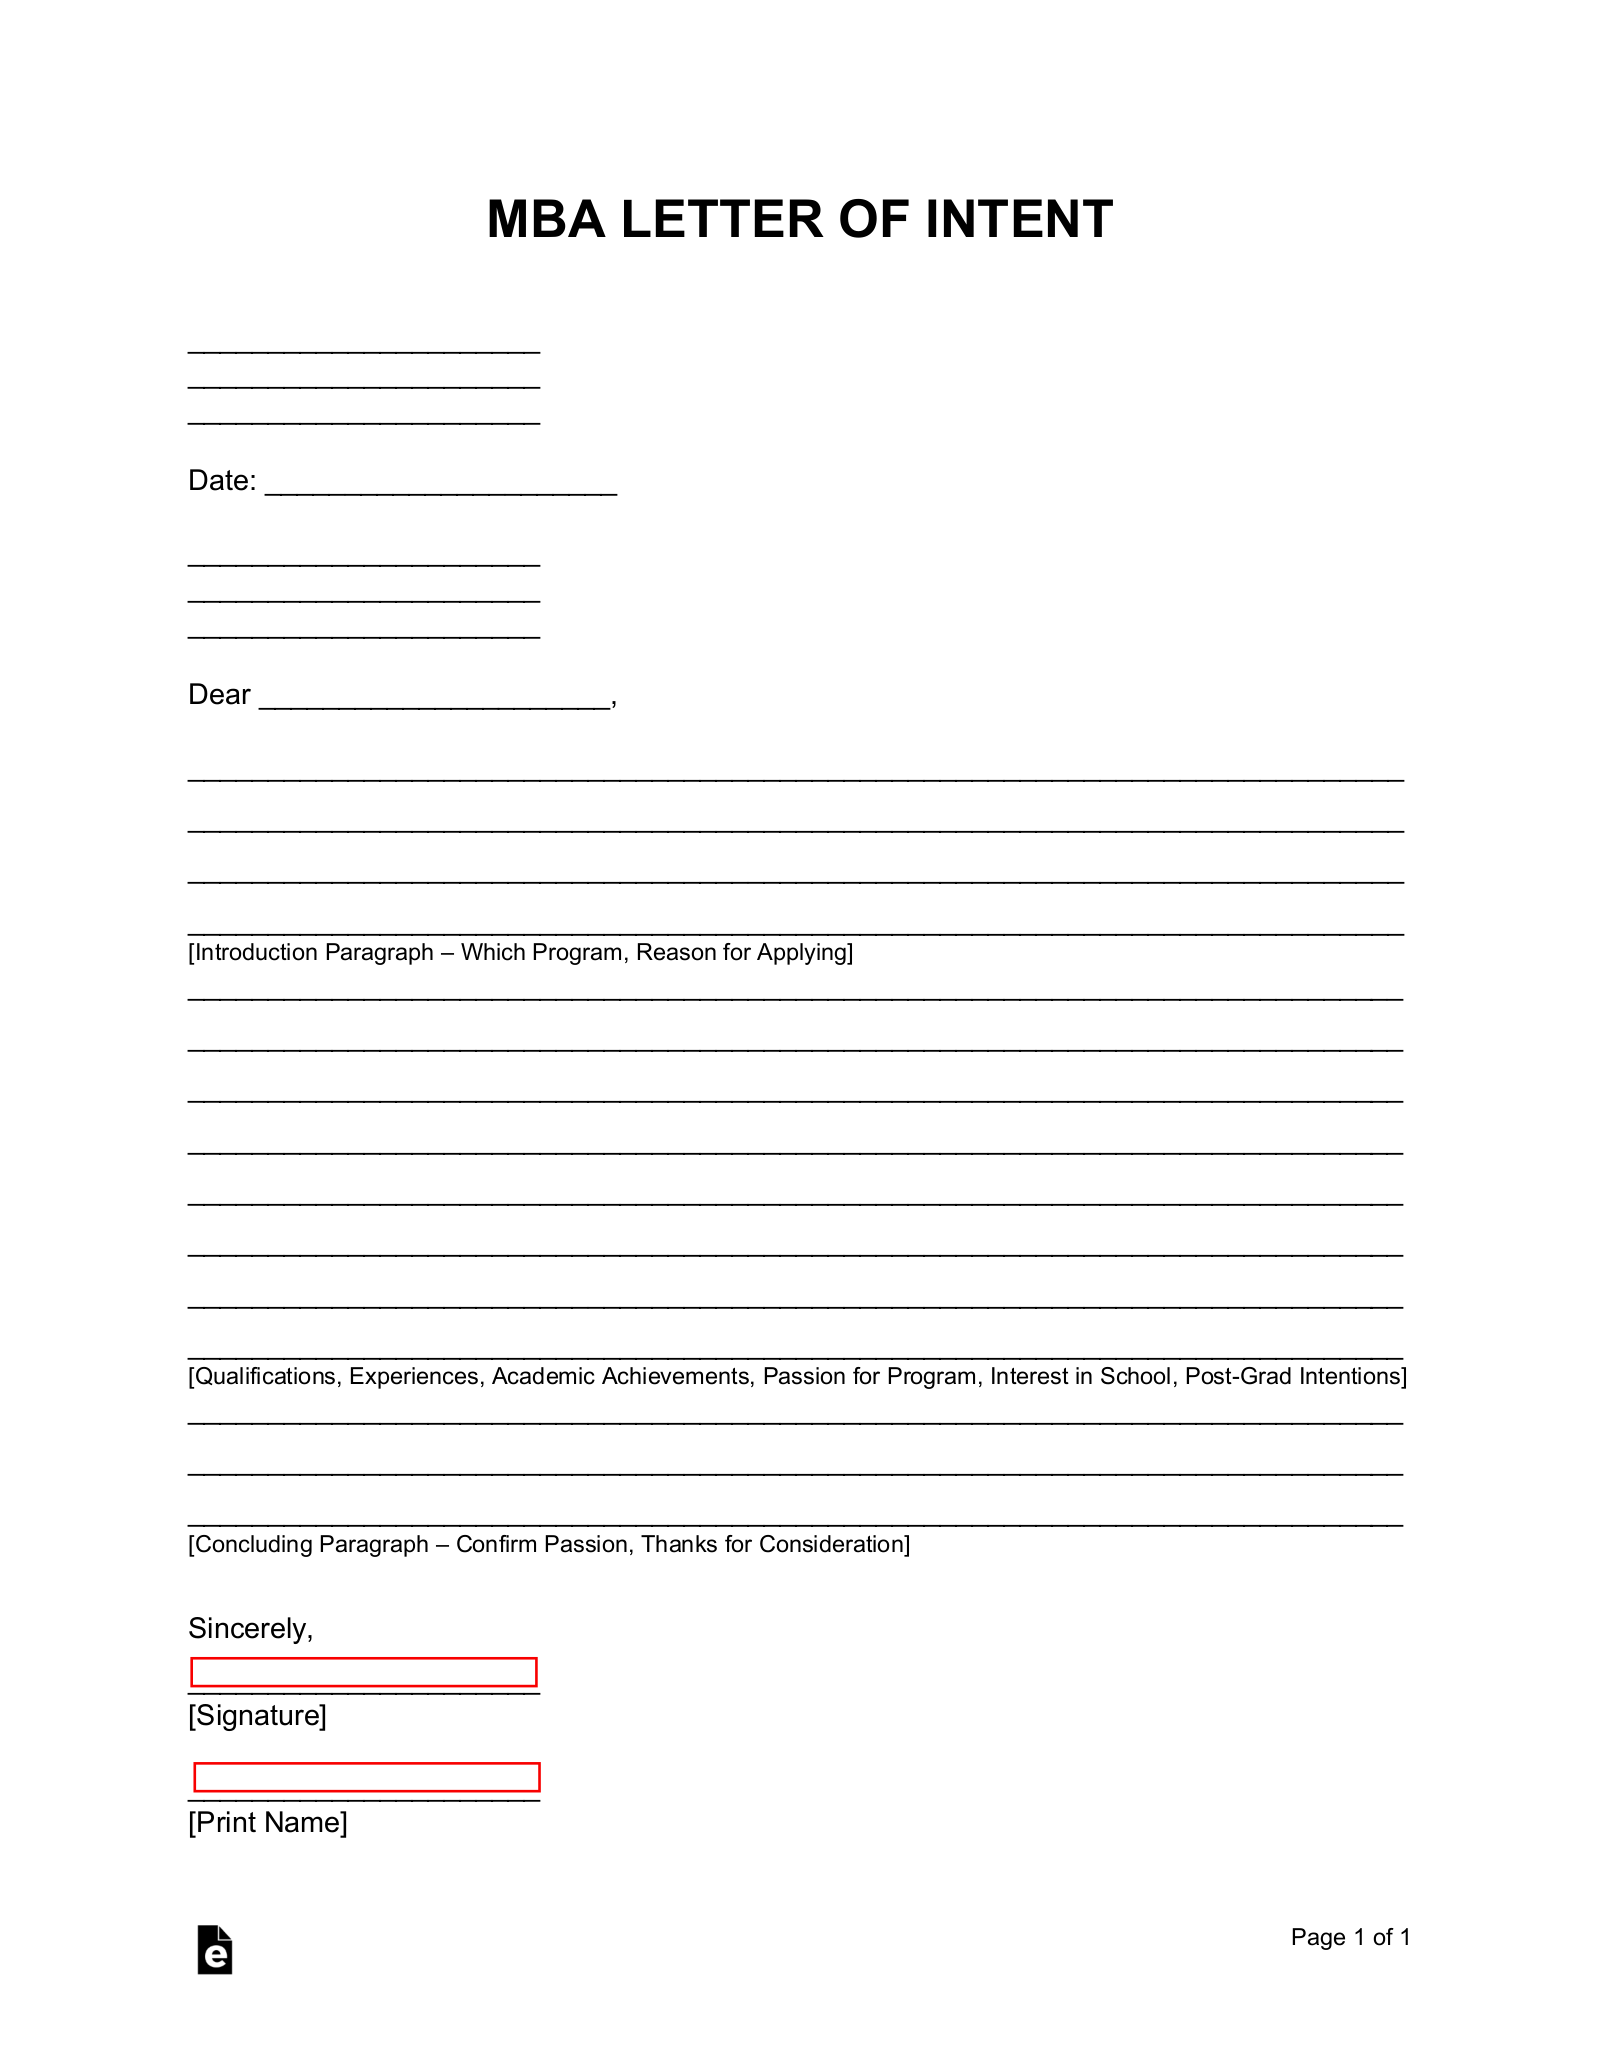 MBA Letter of Intent Template